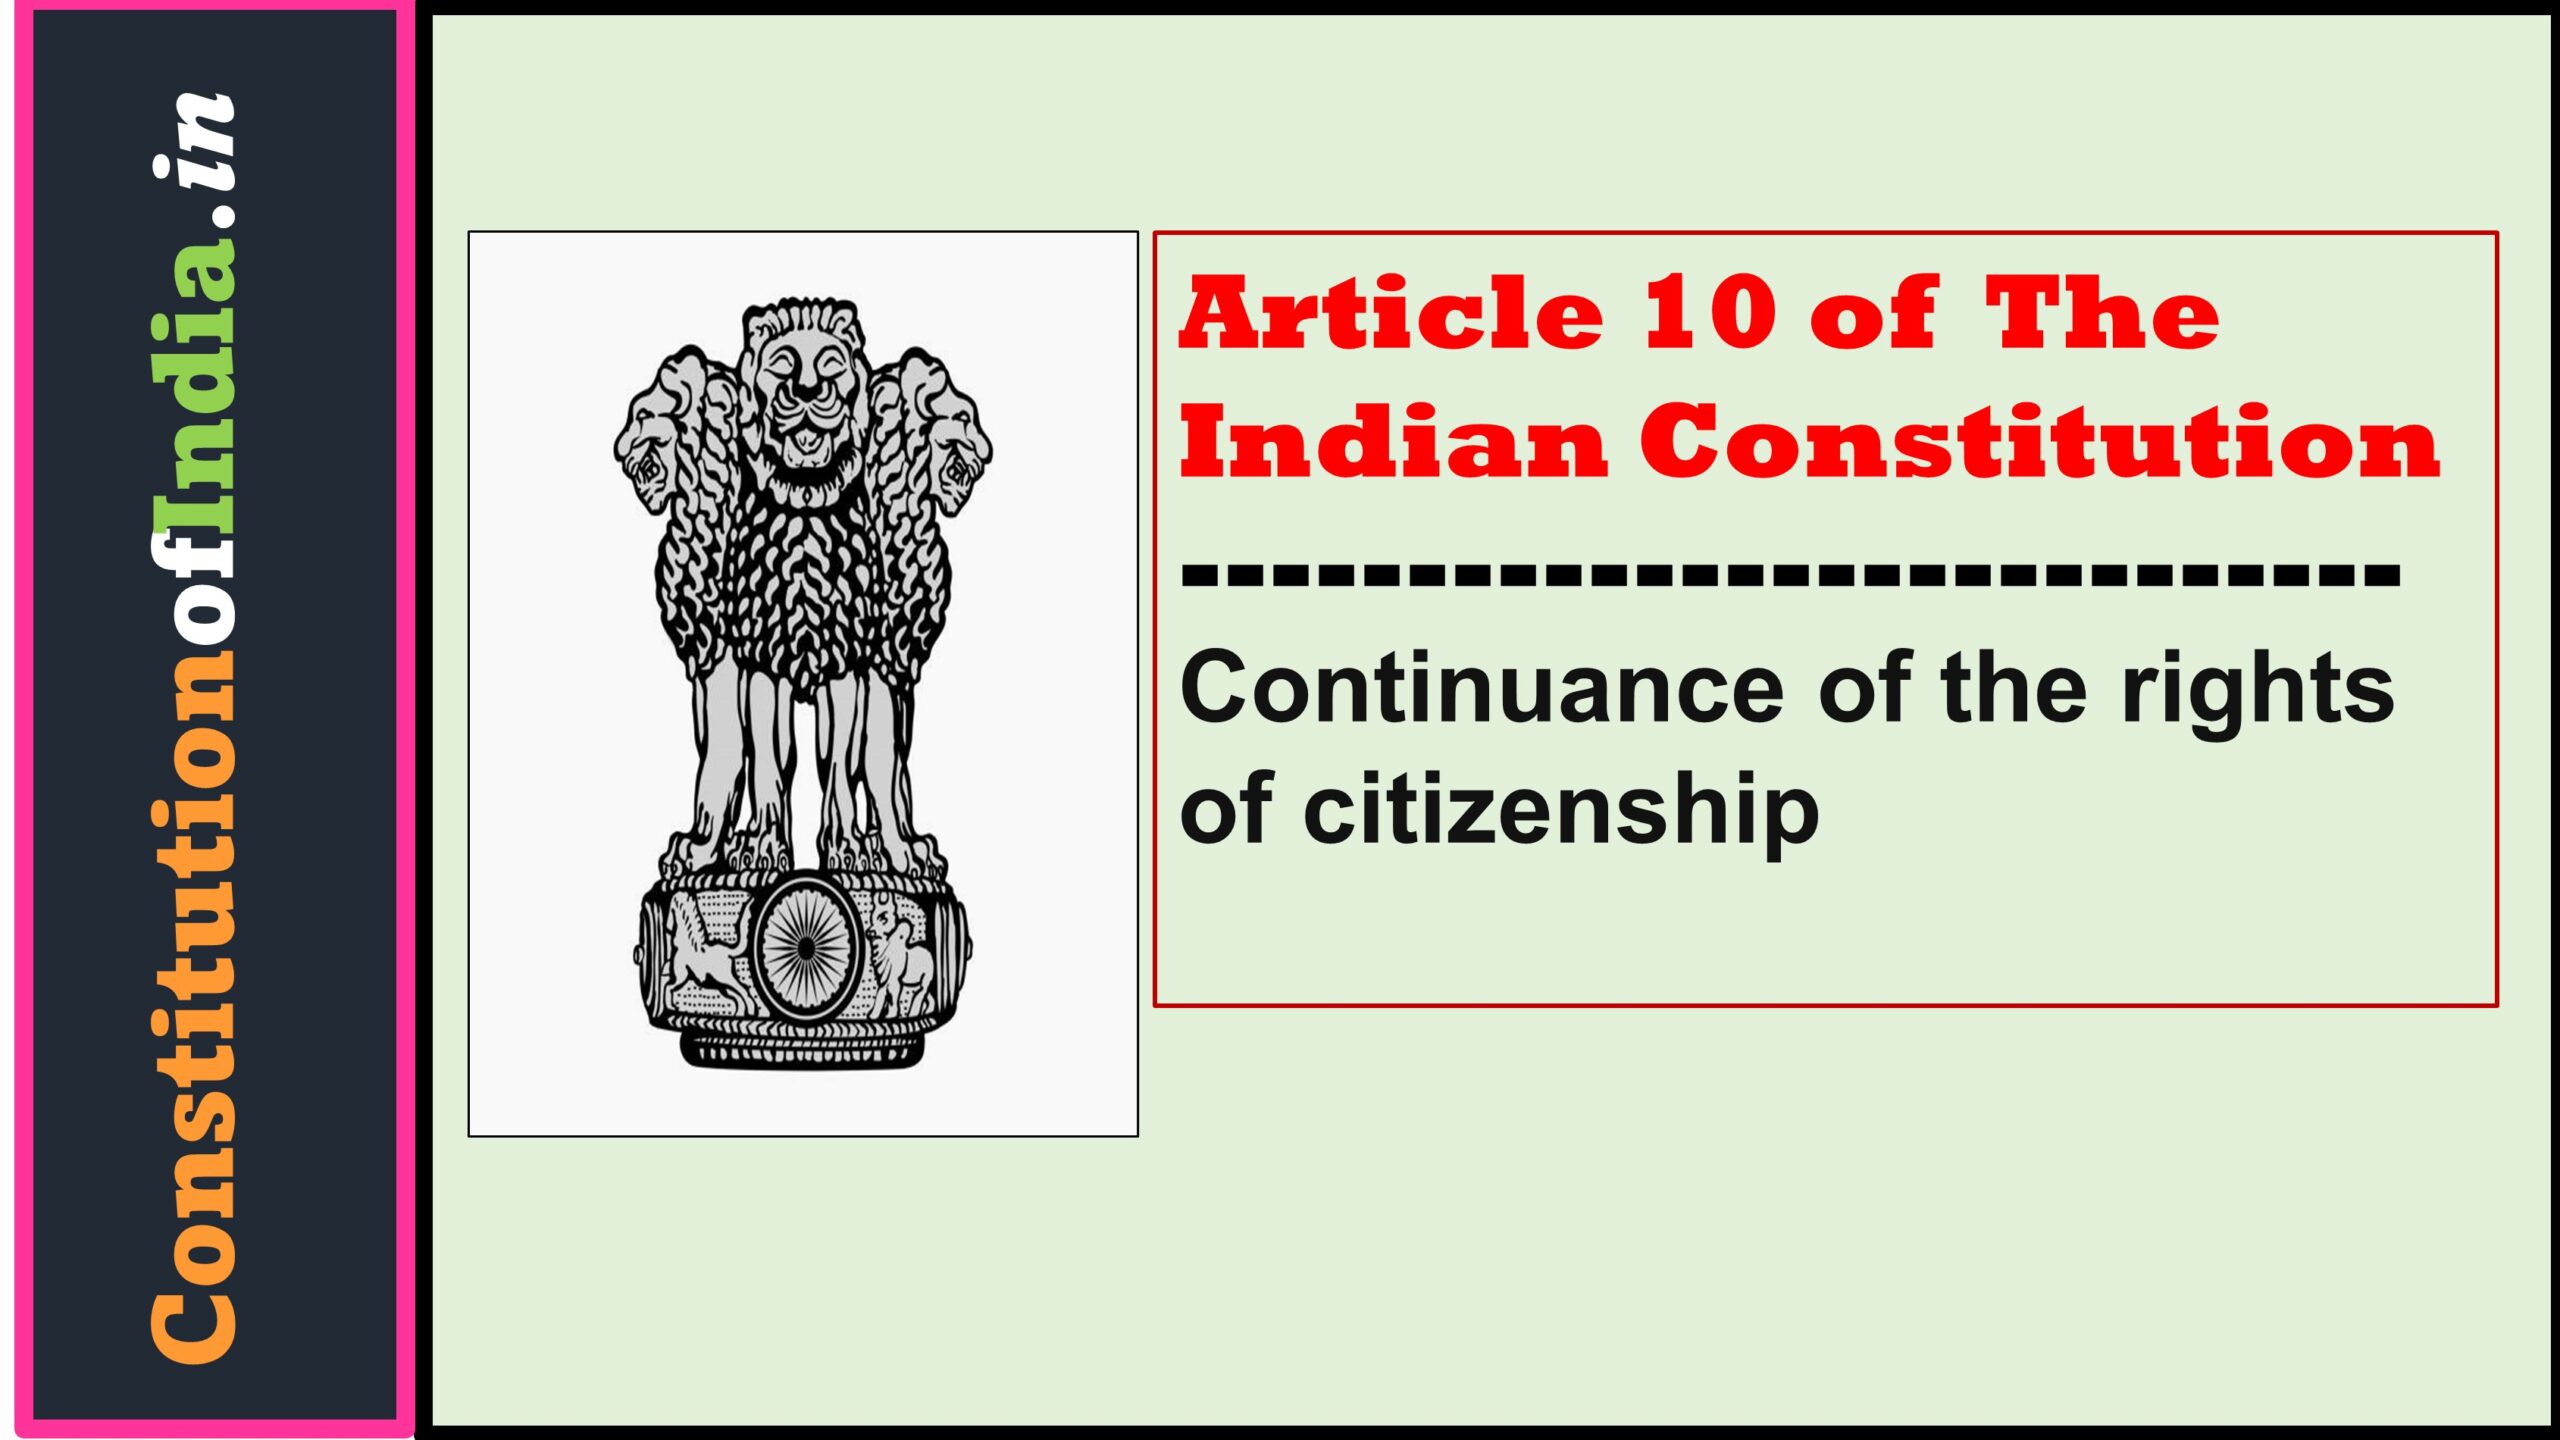 Article 10 of Indian Constitution Continuance of the rights of citizenship.